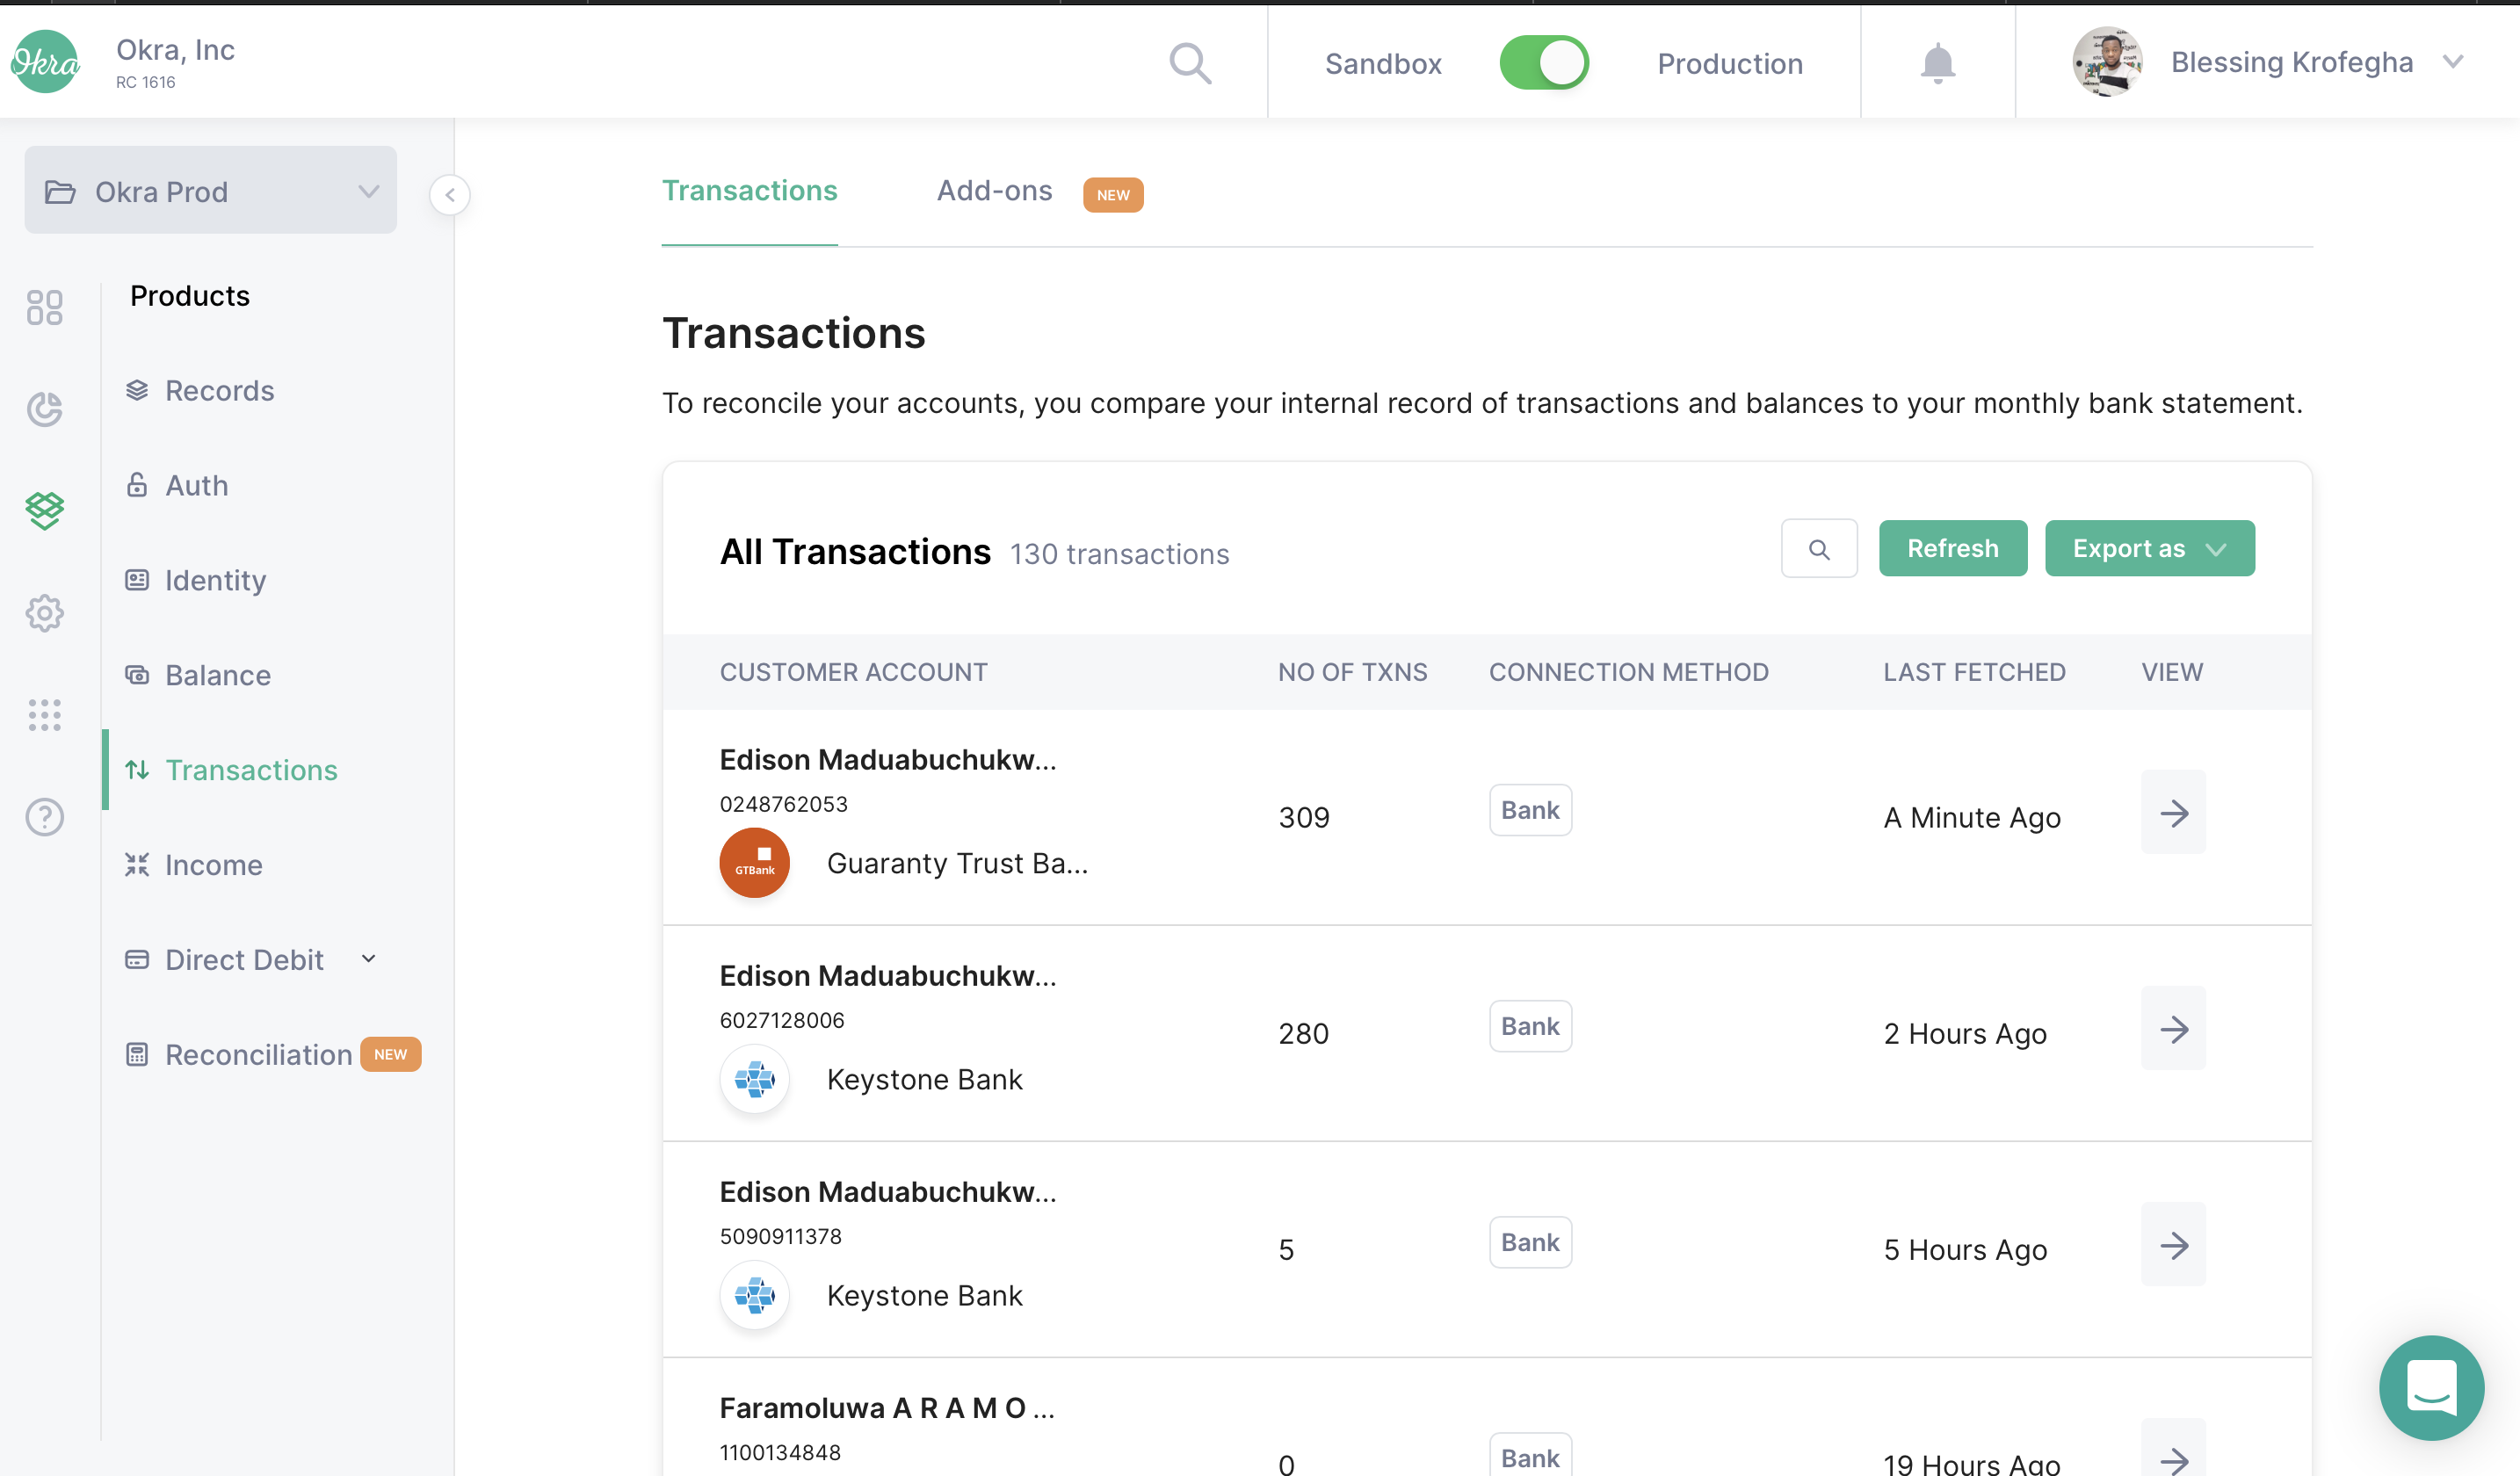 Transaction Page